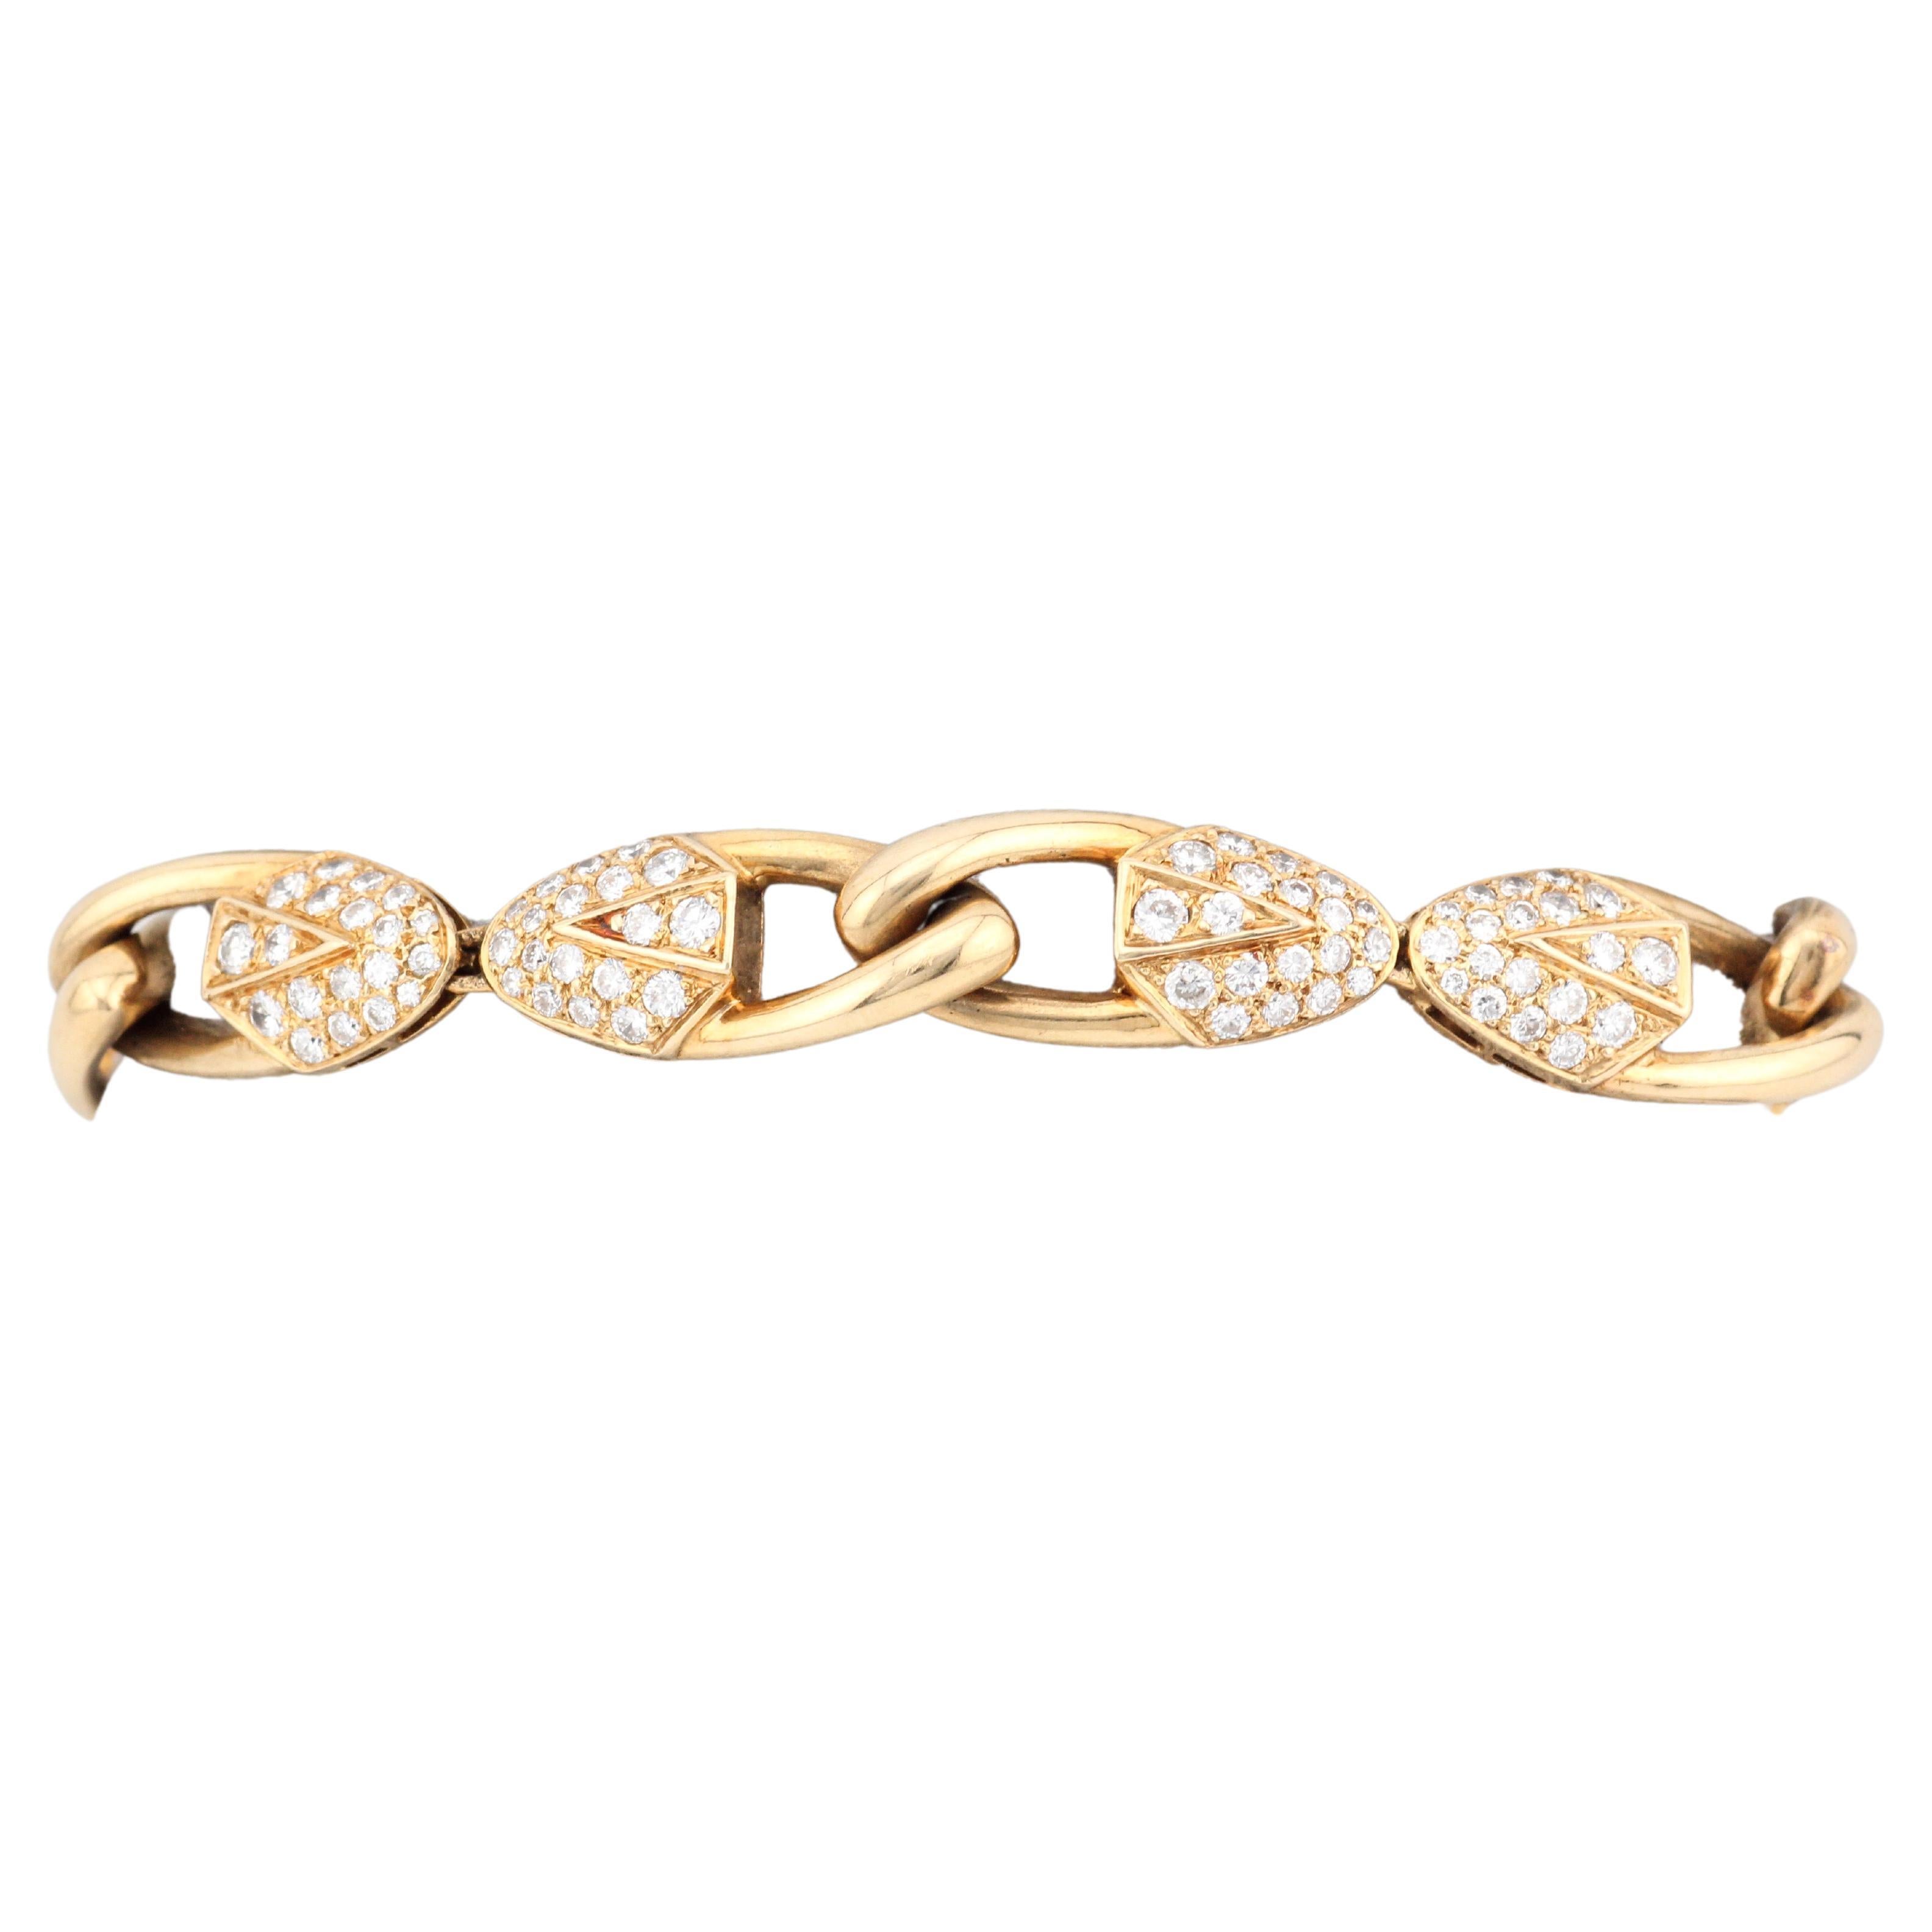 Embrace Vintage Glamour with a Piaget Pave Diamond Bracelet

This exquisite vintage bracelet from Piaget is a timeless treasure for the discerning jewelry collector. Crafted in luxurious 18k yellow gold, the bracelet boasts a captivating pave